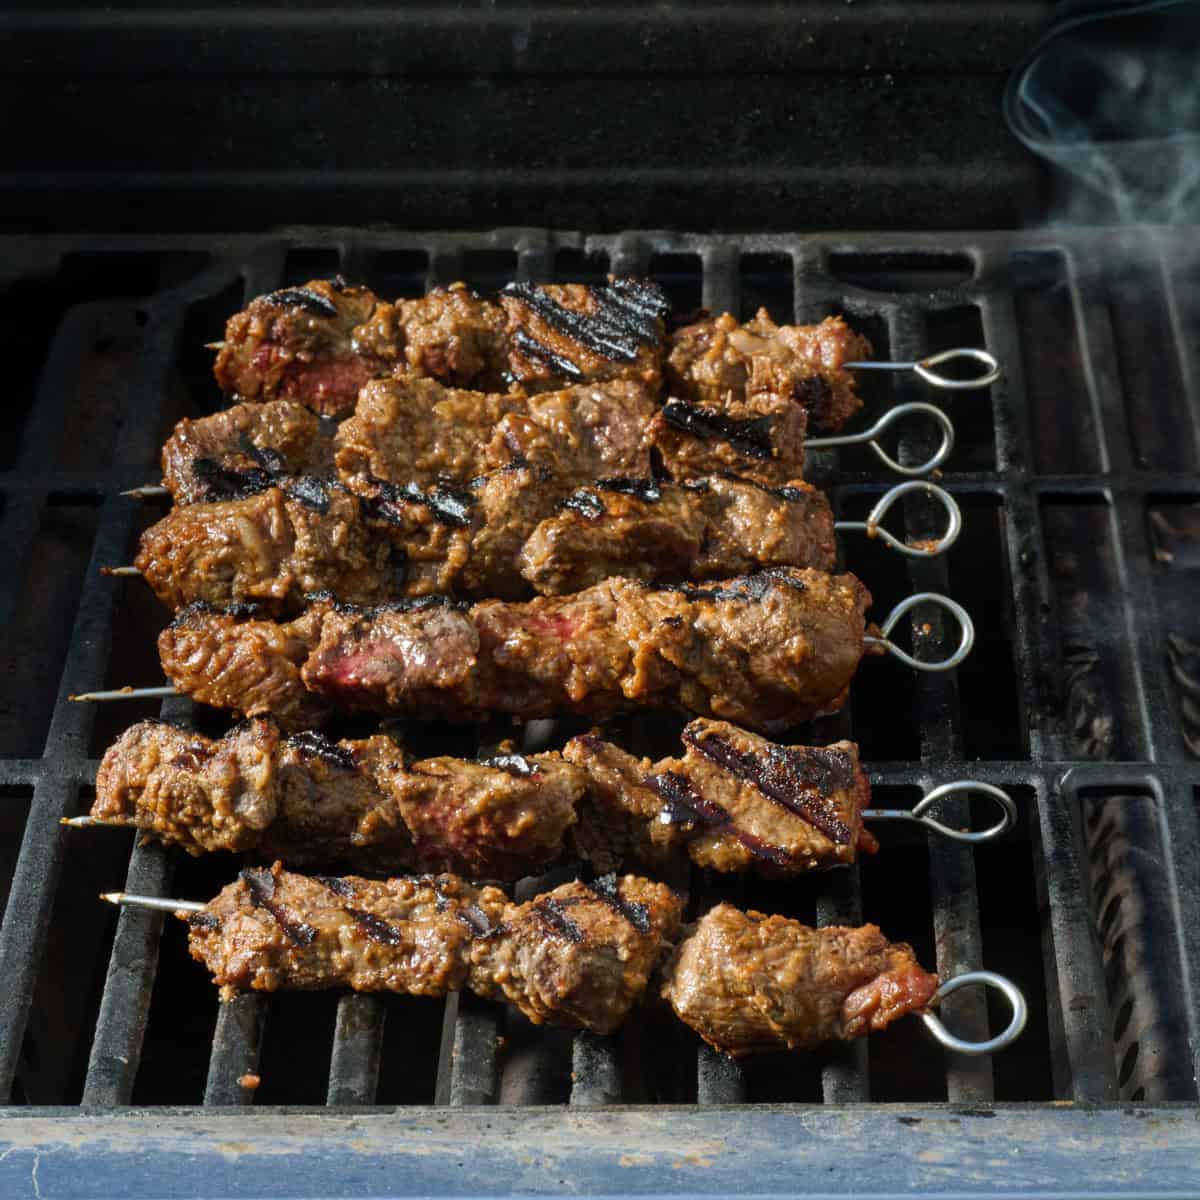 Beef skewers on grill after cooking.